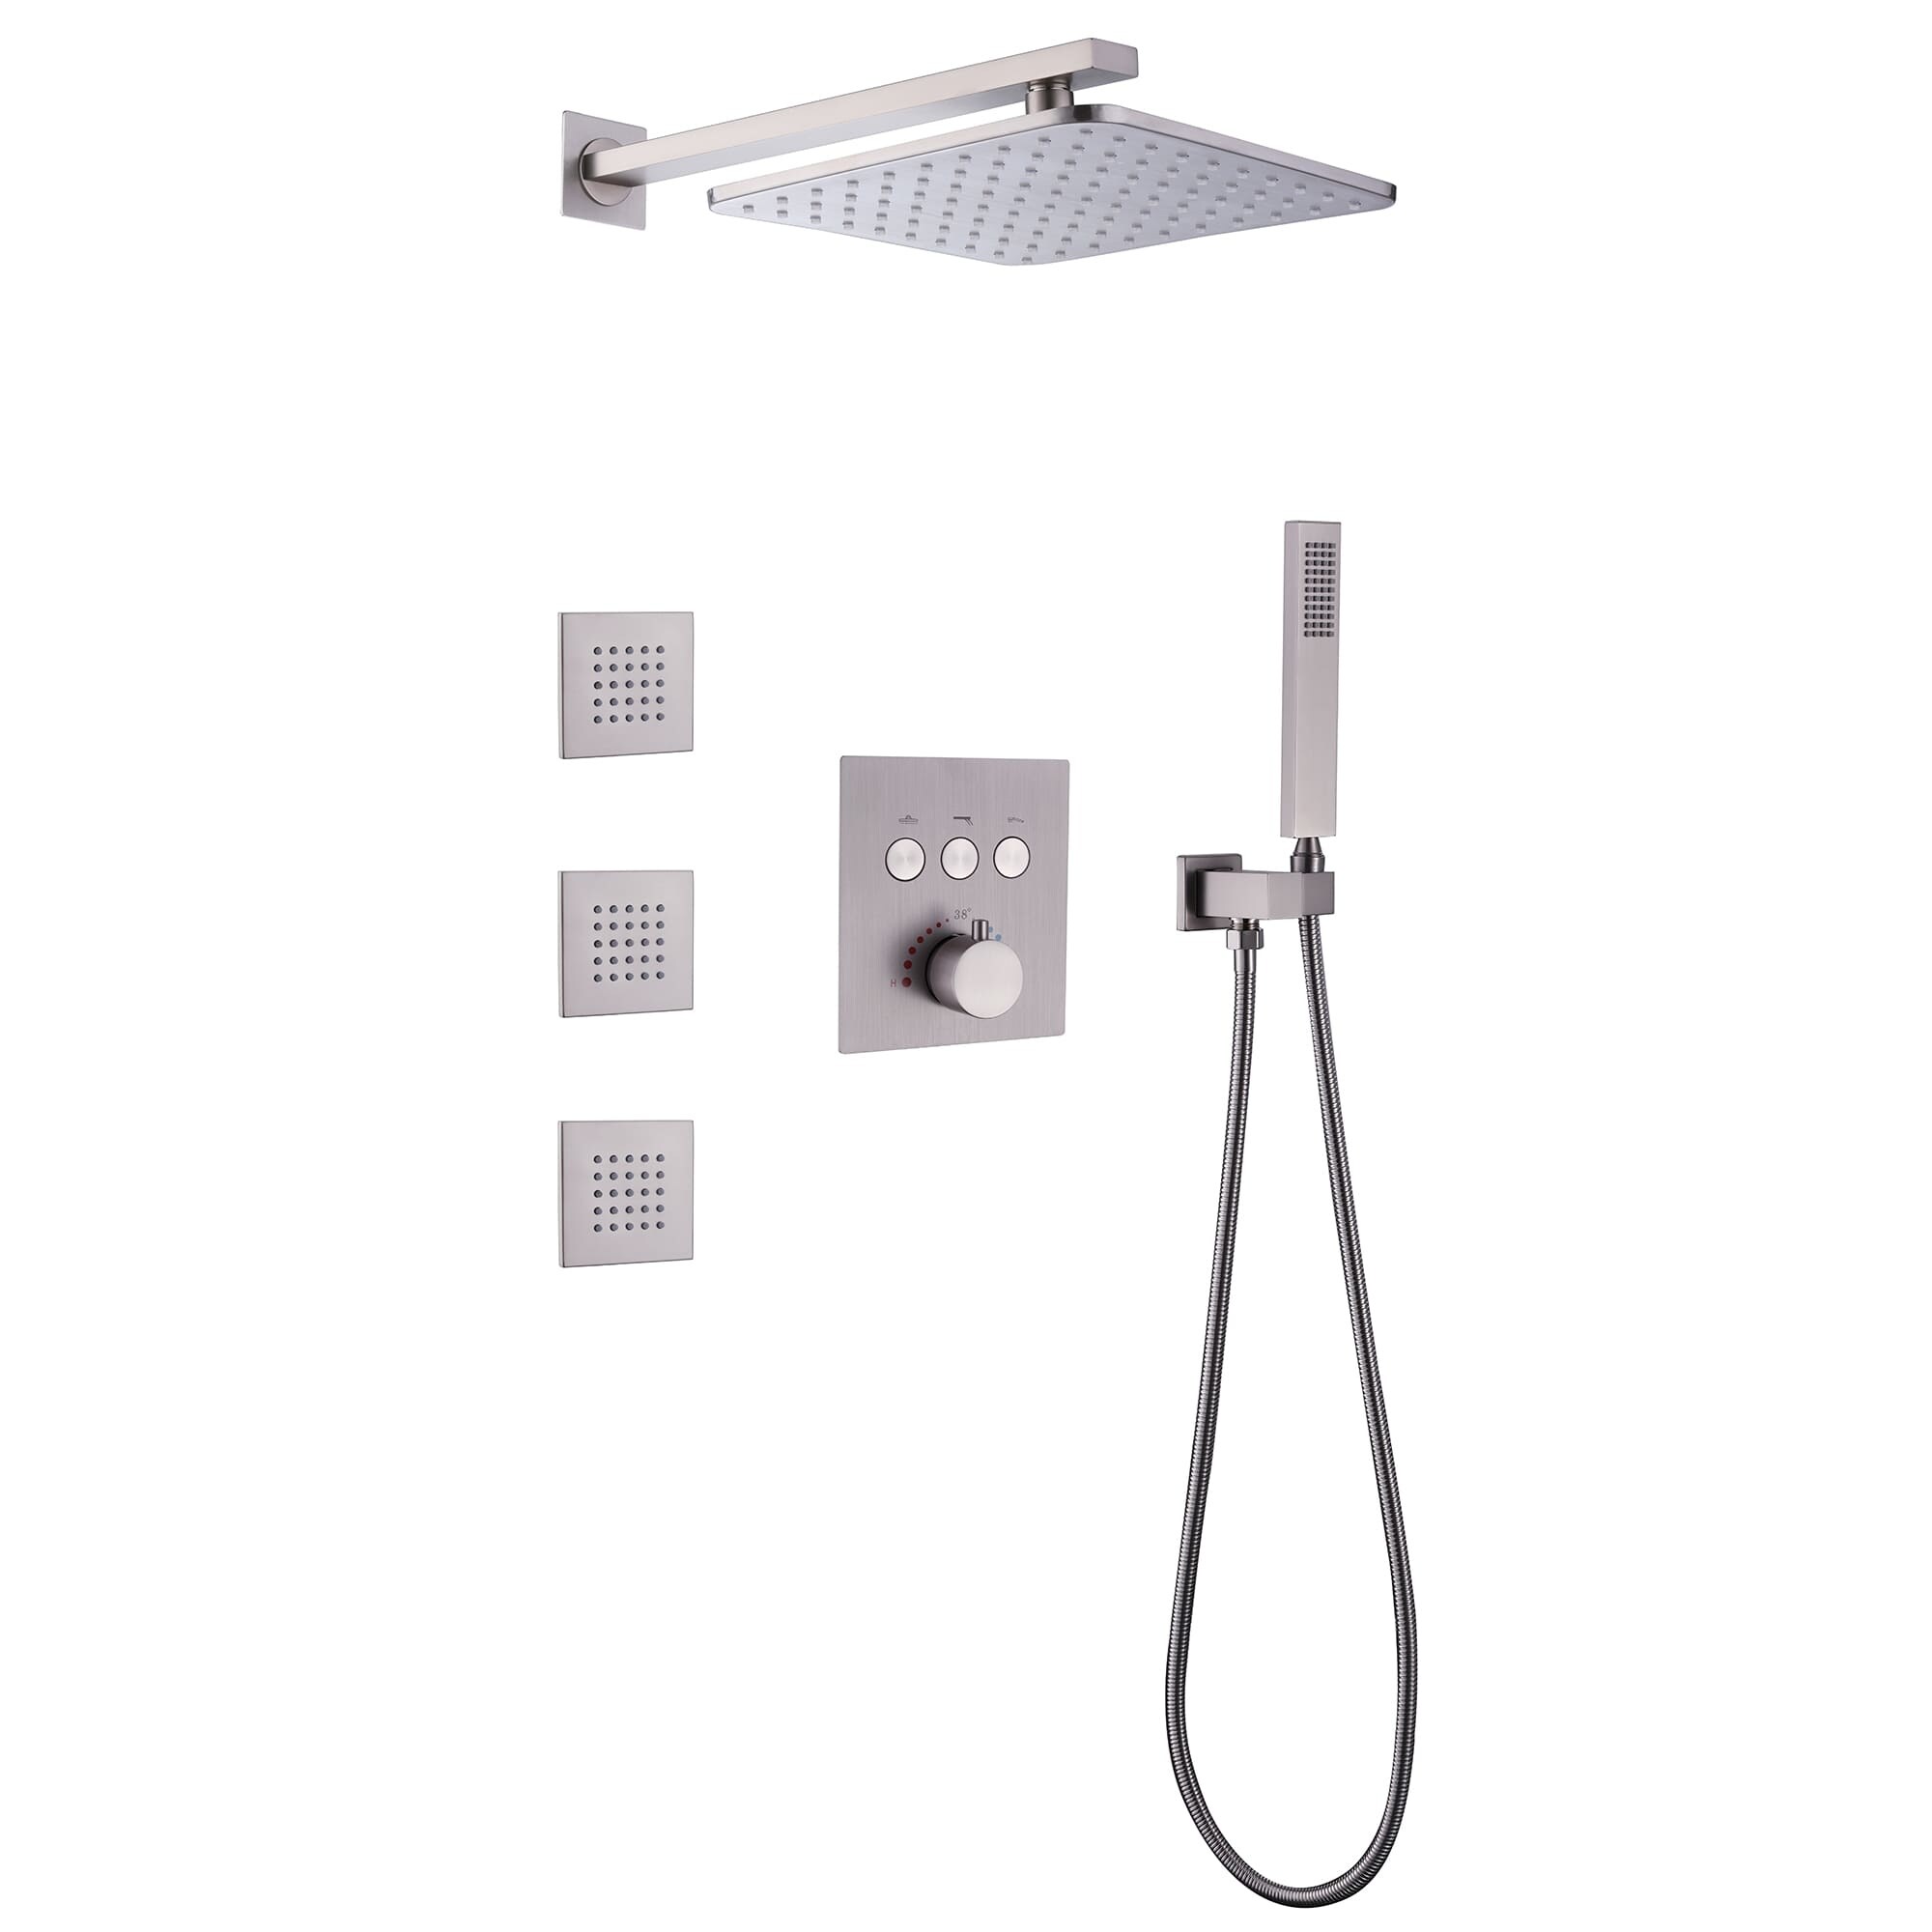 https://ak1.ostkcdn.com/images/products/is/images/direct/69bd71de5833c5d0b4823a87b6a8e5e6b020deb8/Thermostatic-Shower-System-With-Rough-in-Valve-Bathroom-Shower-Faucet-With-Hand-Shower-And-Body-Jet-Rain-10-Inch-Shower-Head-Set.jpg